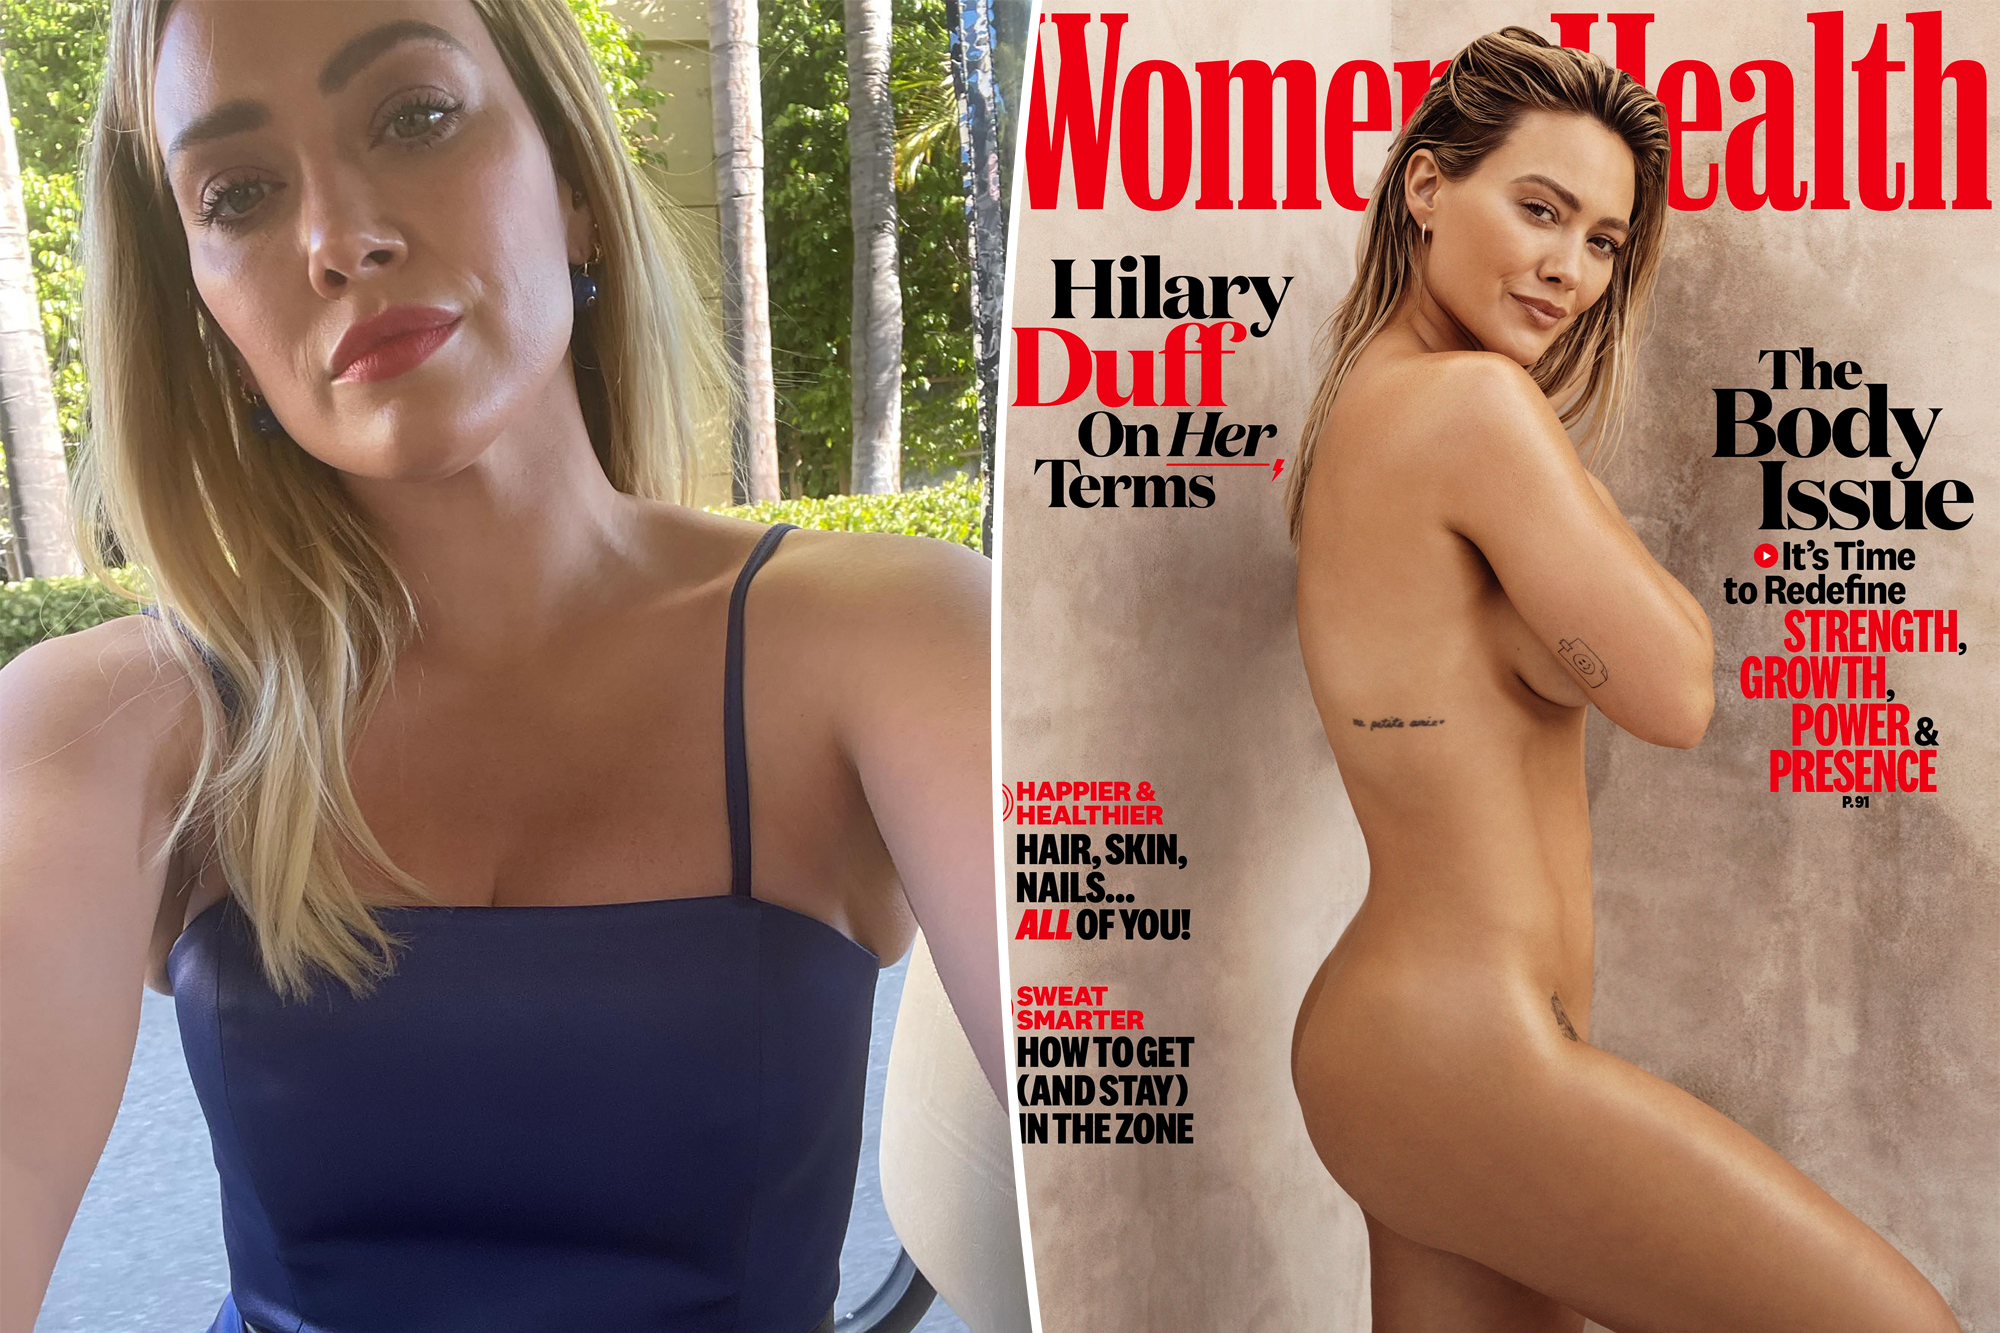 aleksandra alempijevic recommends naked pictures of hilary duff pic